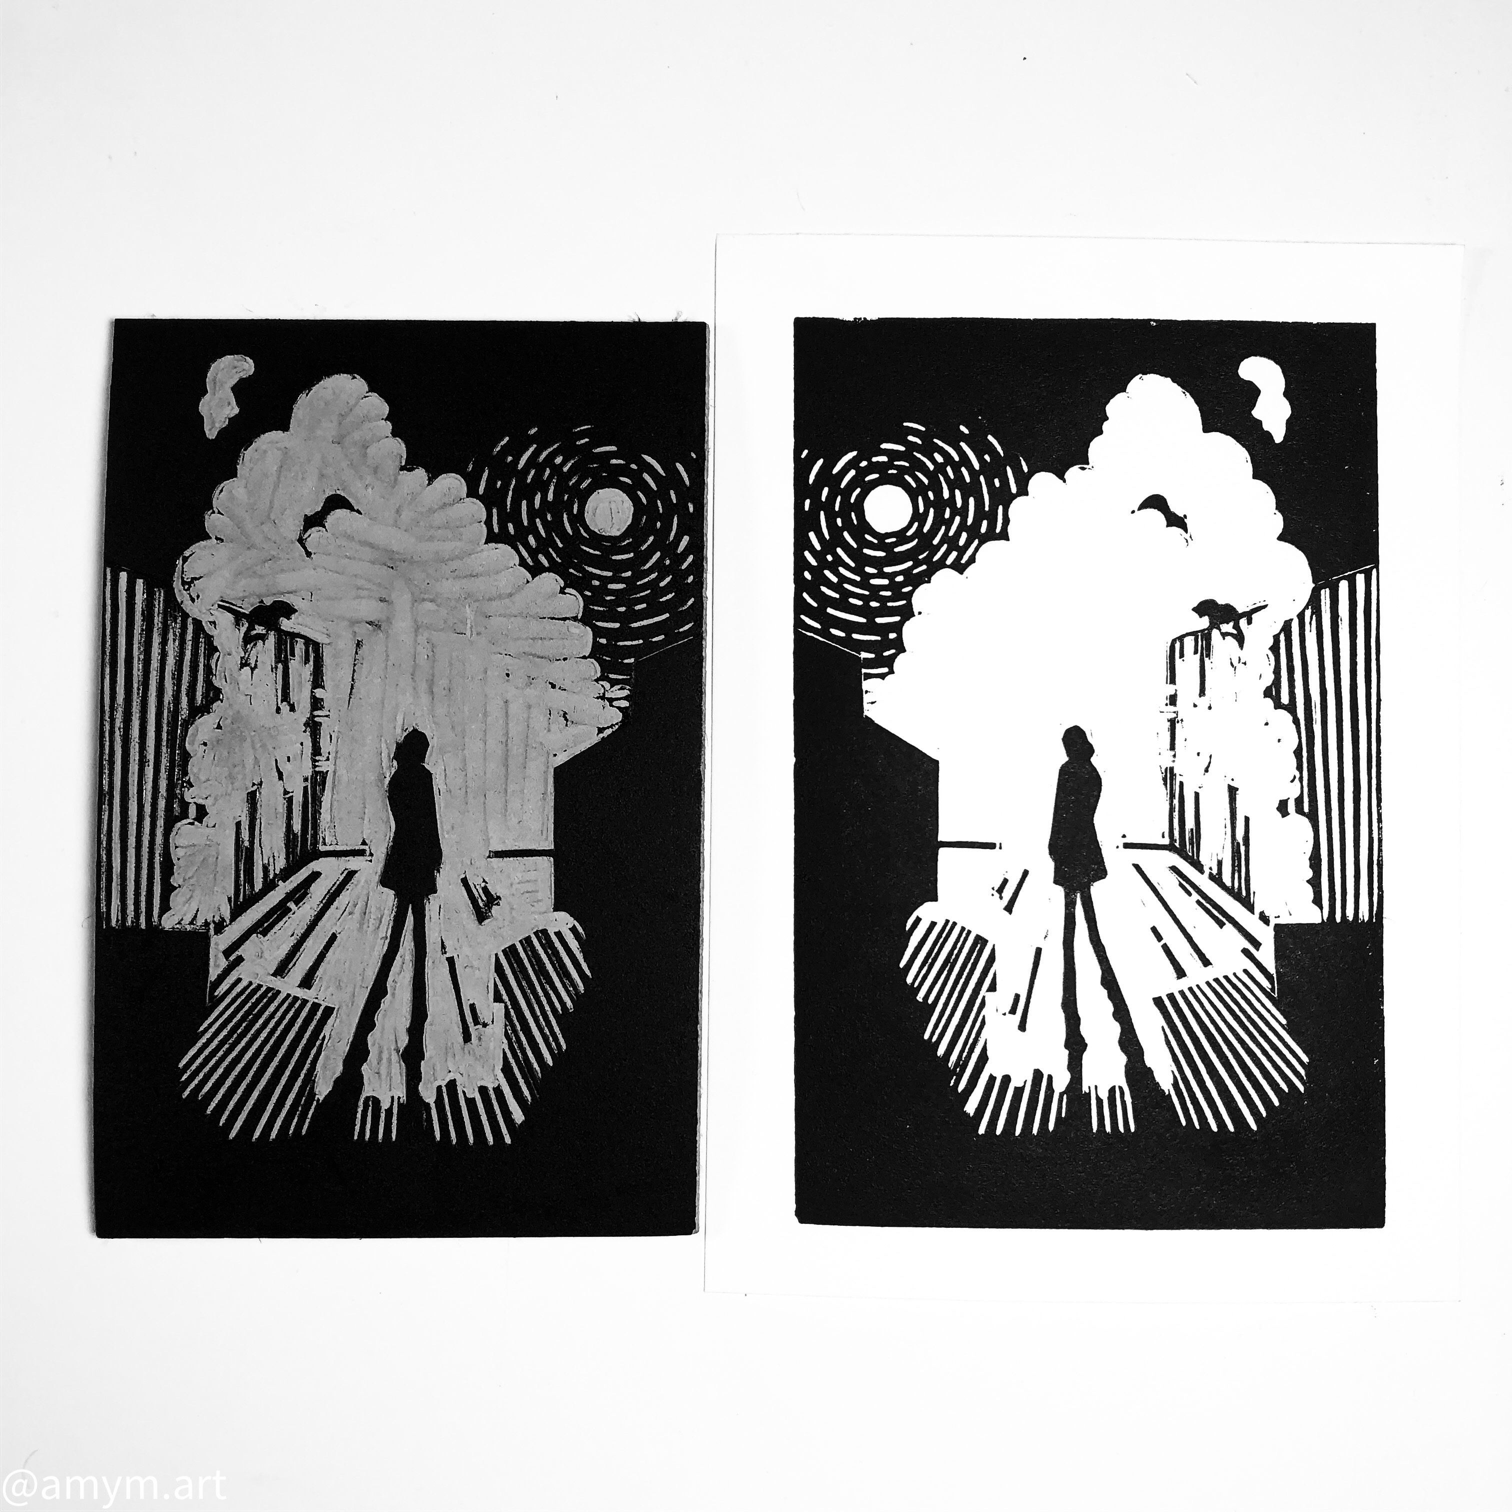 From the Ashes Linocut Print 5x7, Hand Printed Black and White Blo